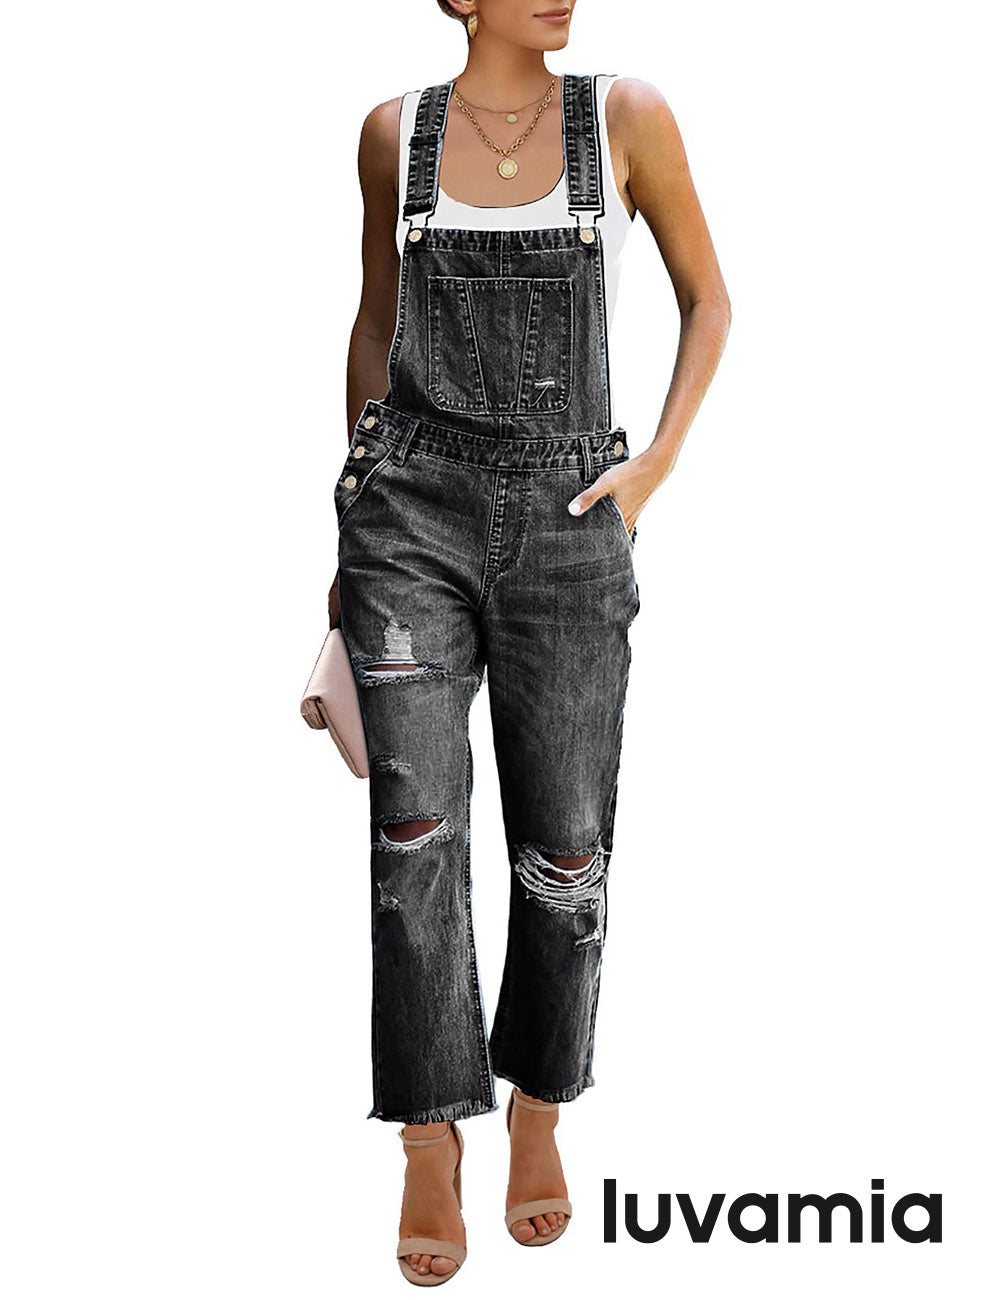 Denim Overalls - Weissman Mixify - Product no longer available for purchase